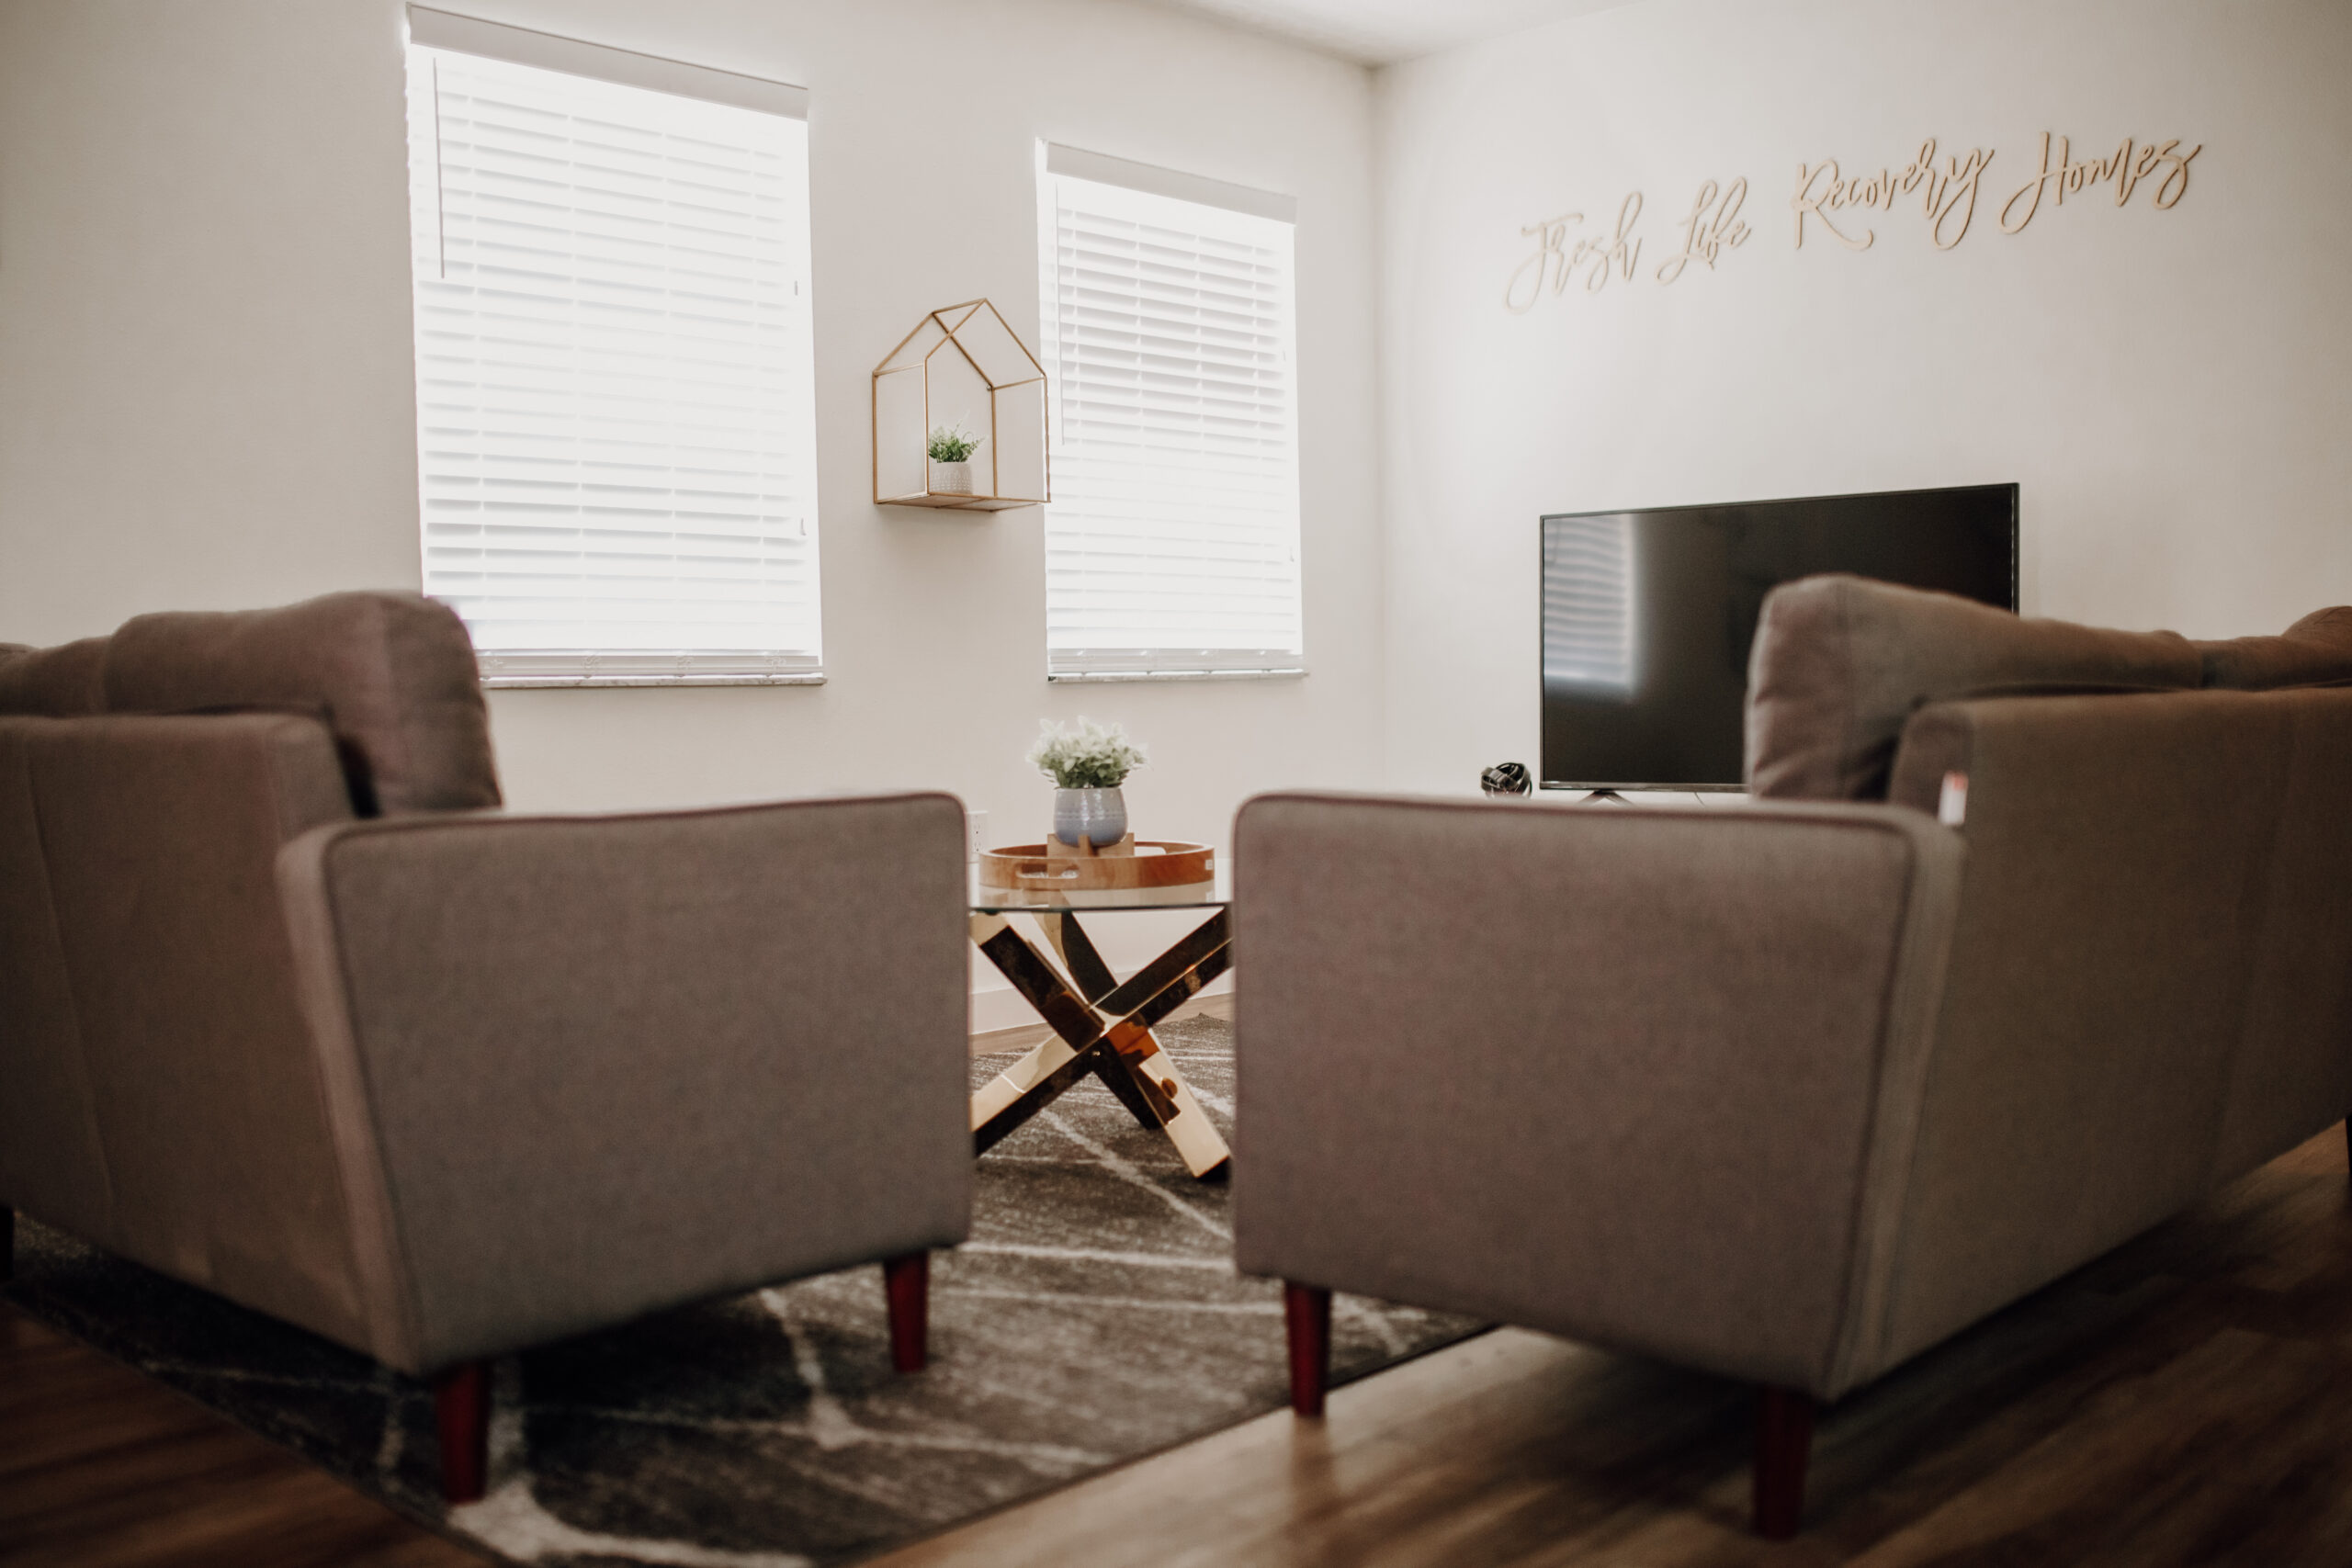 Warm and comfortable living and entertainment room at the safe, modern, therapeutic and supportive environment for Women to attain a “Fresh Life” and a lifetime of recovery from drugs and alcohol.